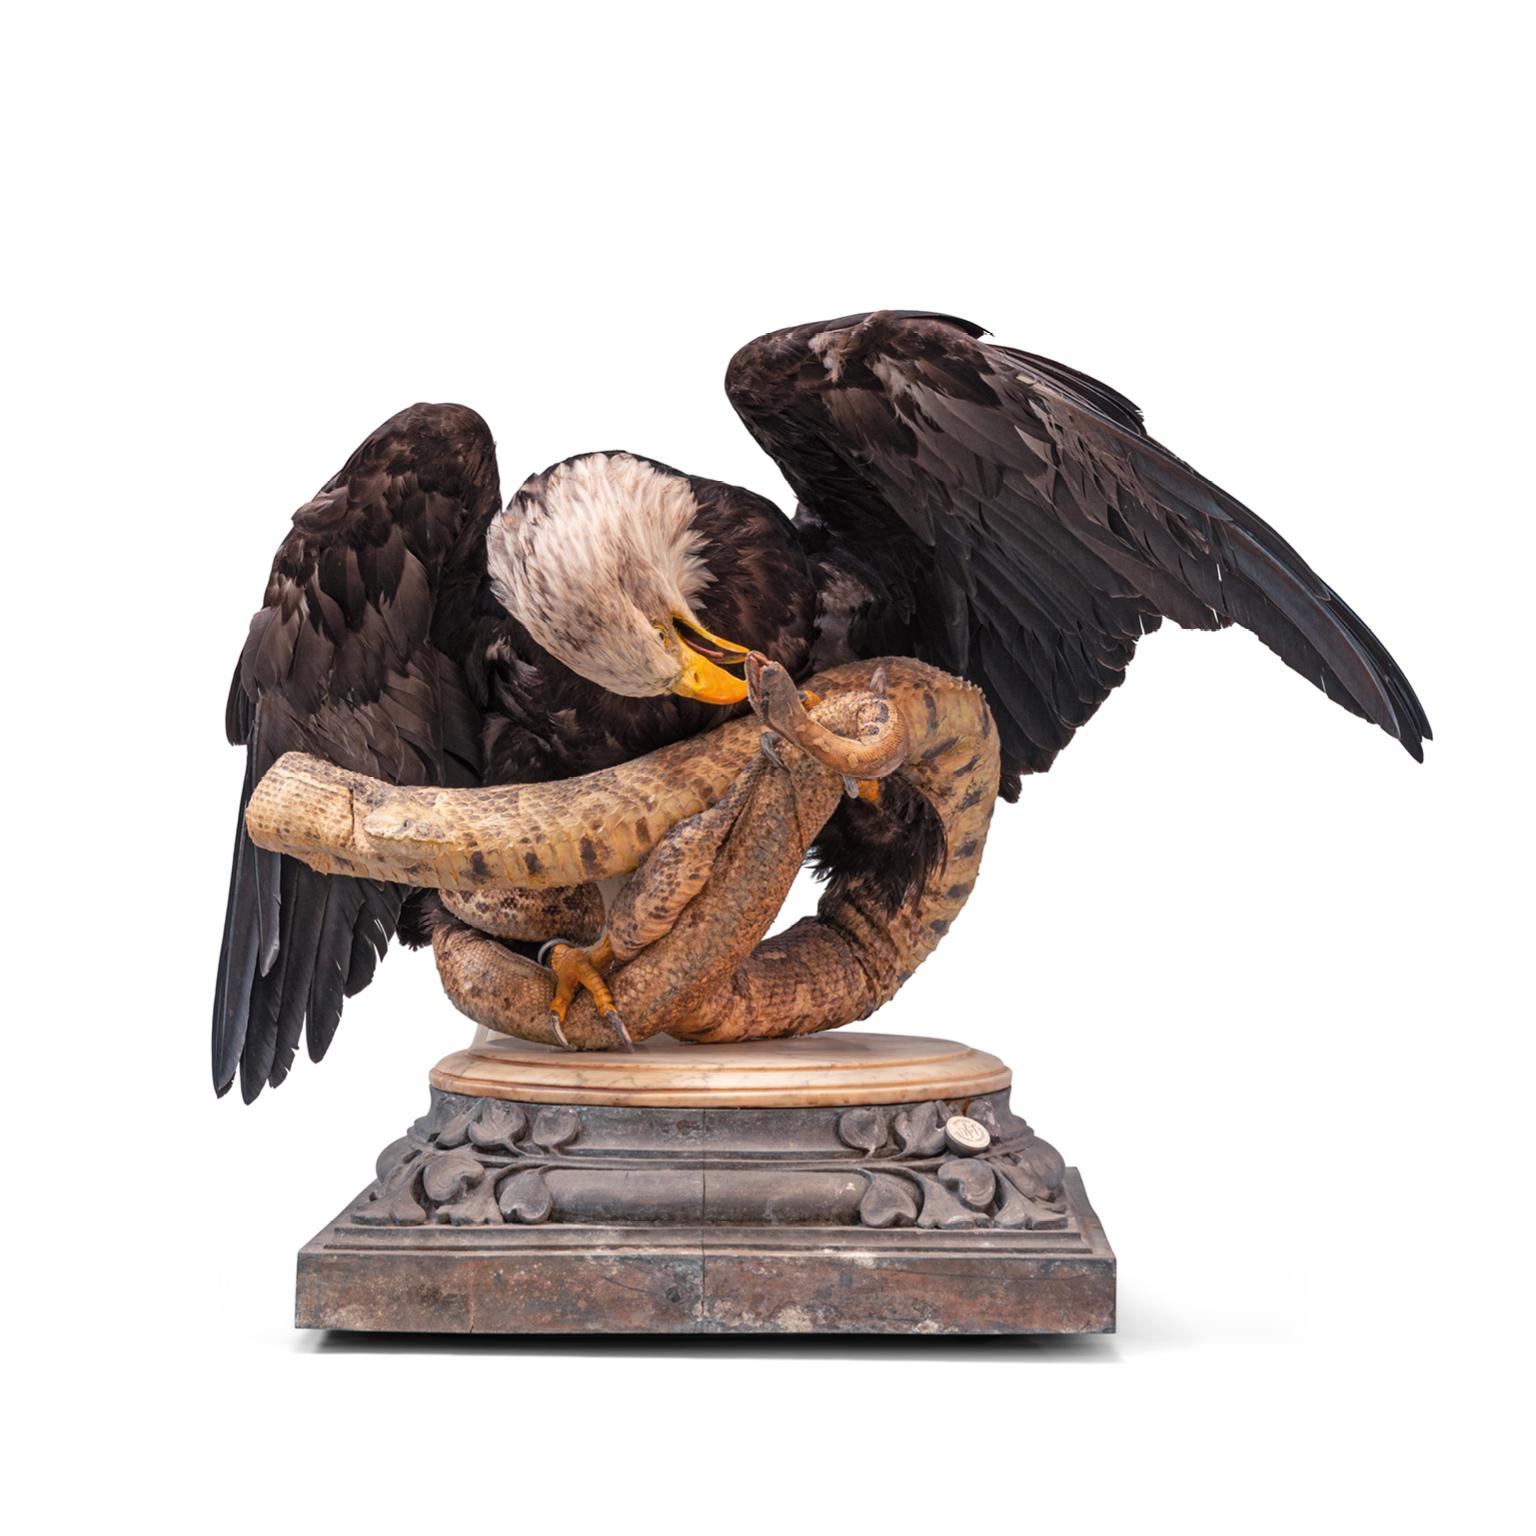 Left: Bald Eagle & Snakes (Haliaeetus leucocephalus)
This magnificent bird of prey fighting two snakes. A Puff adder (Bitis arietans)
and a Blood Python (Python brongersmai). This battle takes place on top of an antique marble and zinc